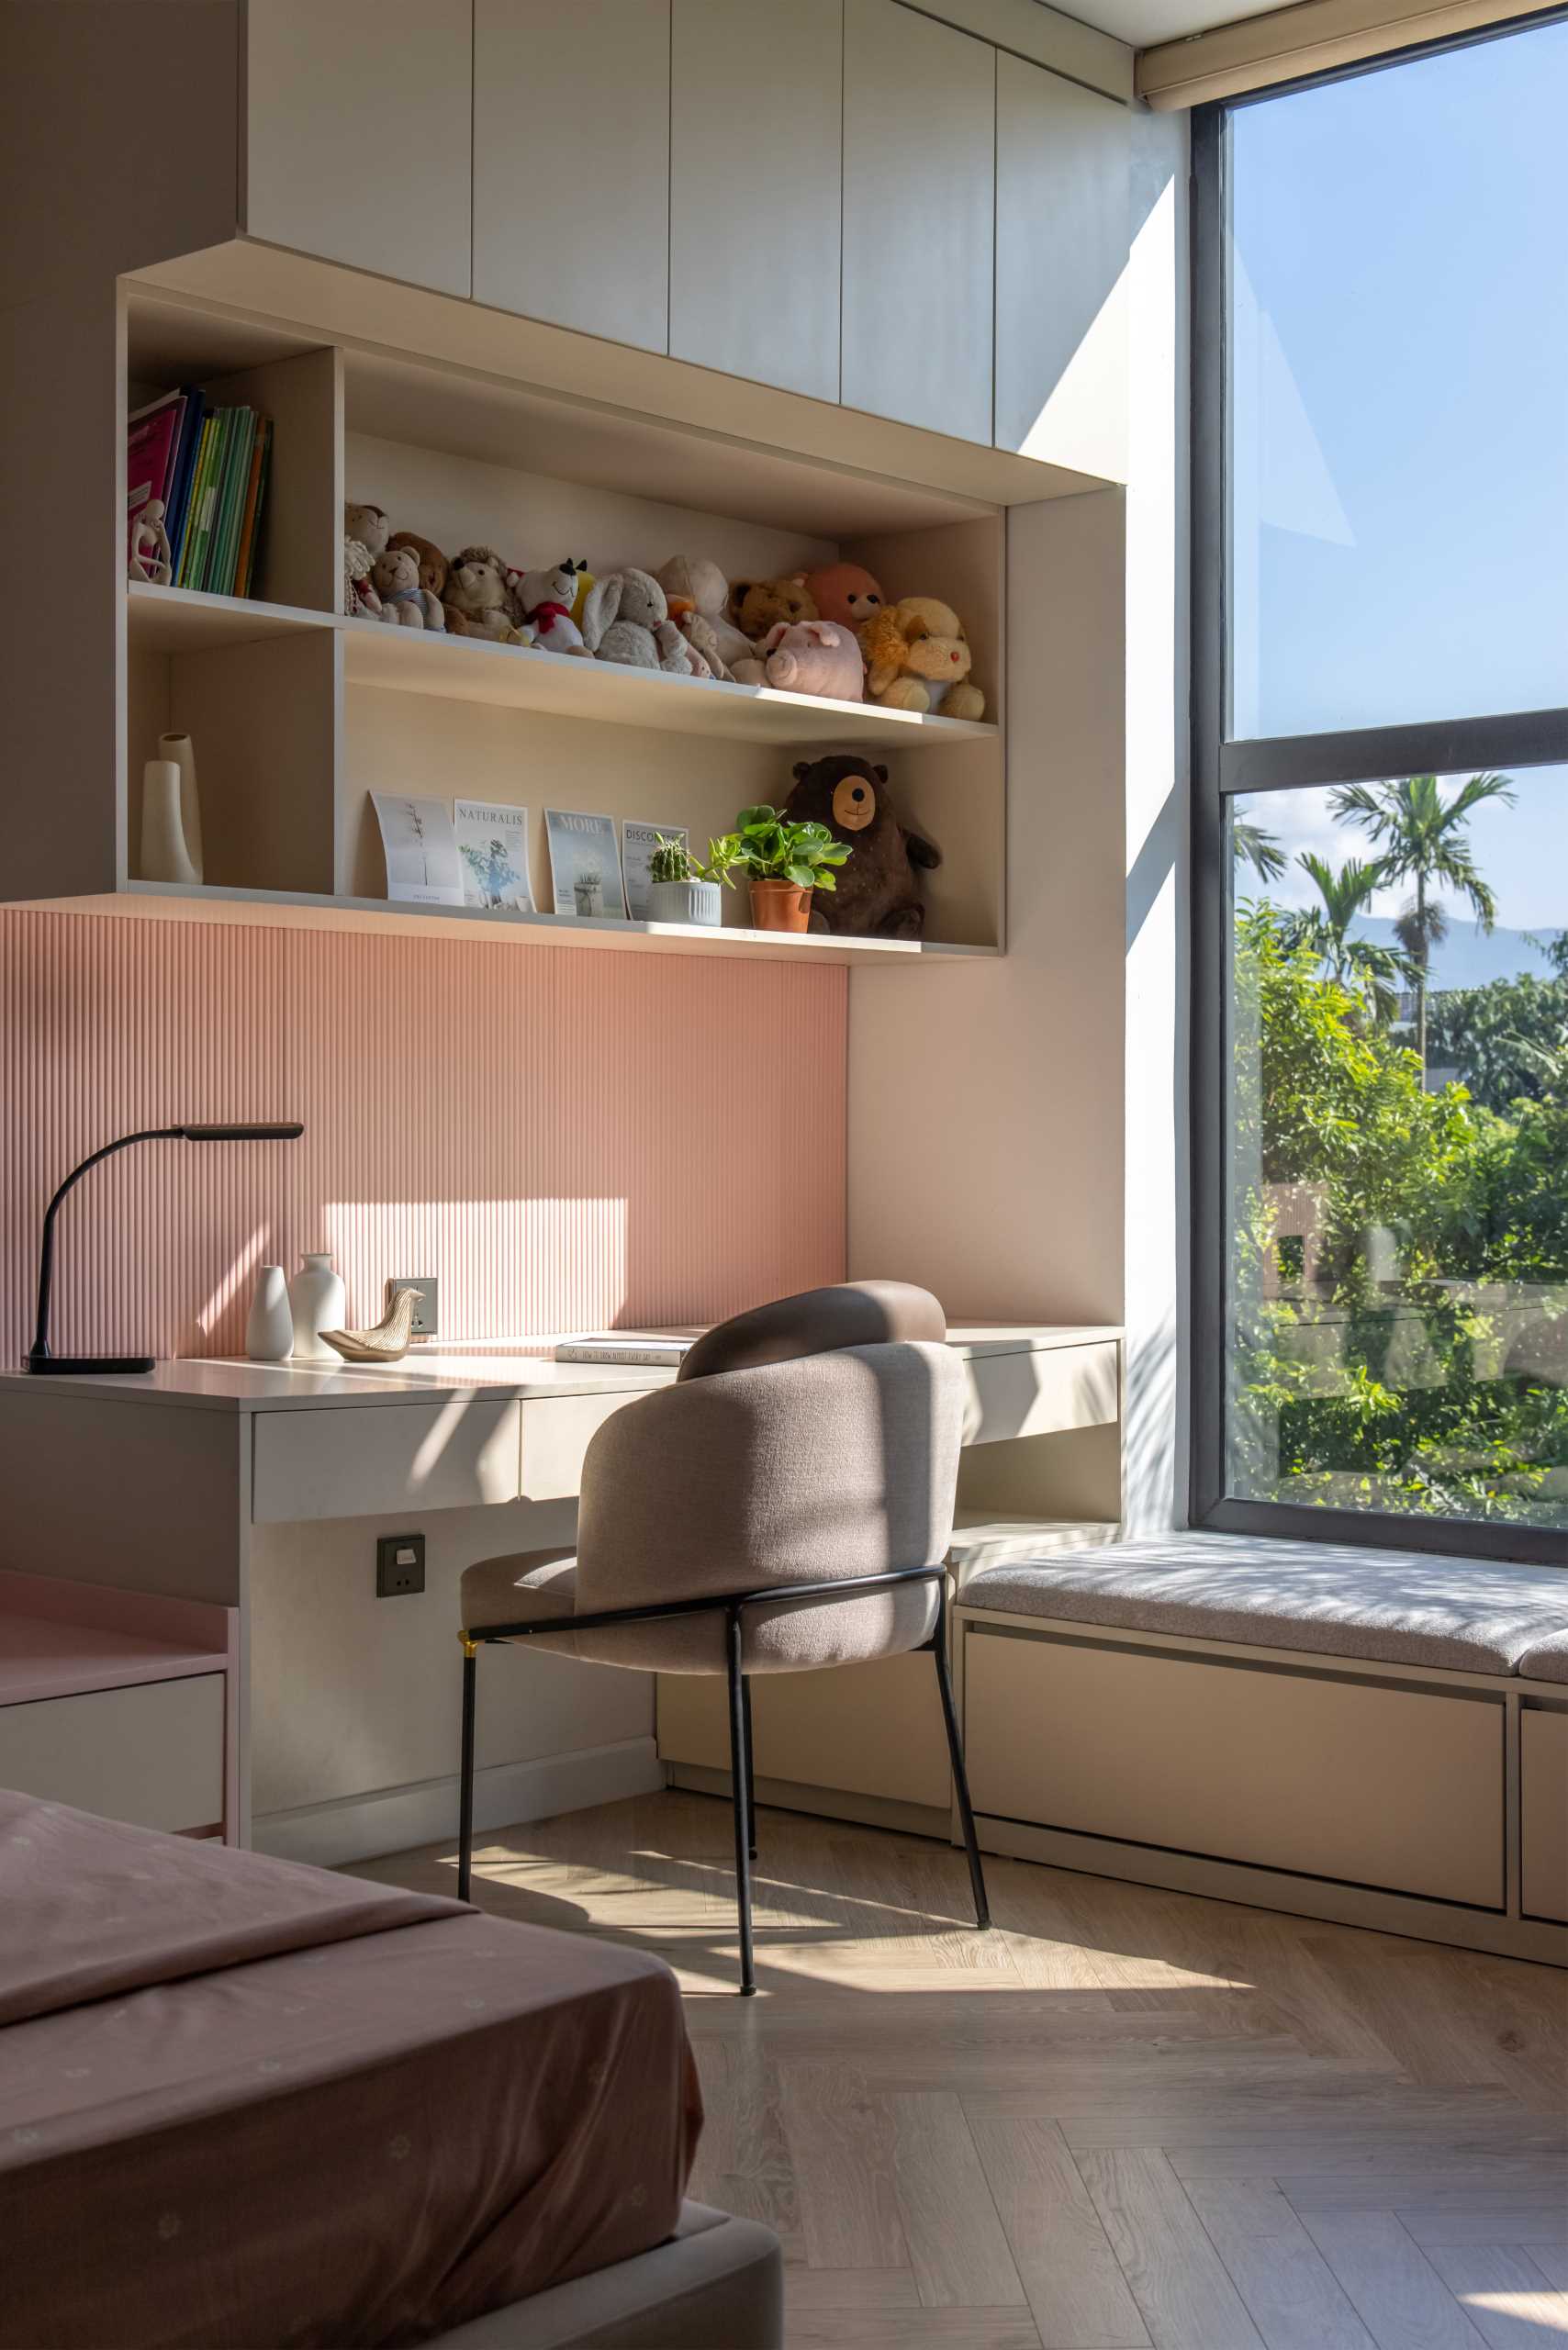 In this kids' bedroom, there's a custom-designed desk with shelving and cabinetry, as well as a bench underneath the window. On the opposite wall, there's the door to the ensuite bathroom and a floor-to-ceiling closet.